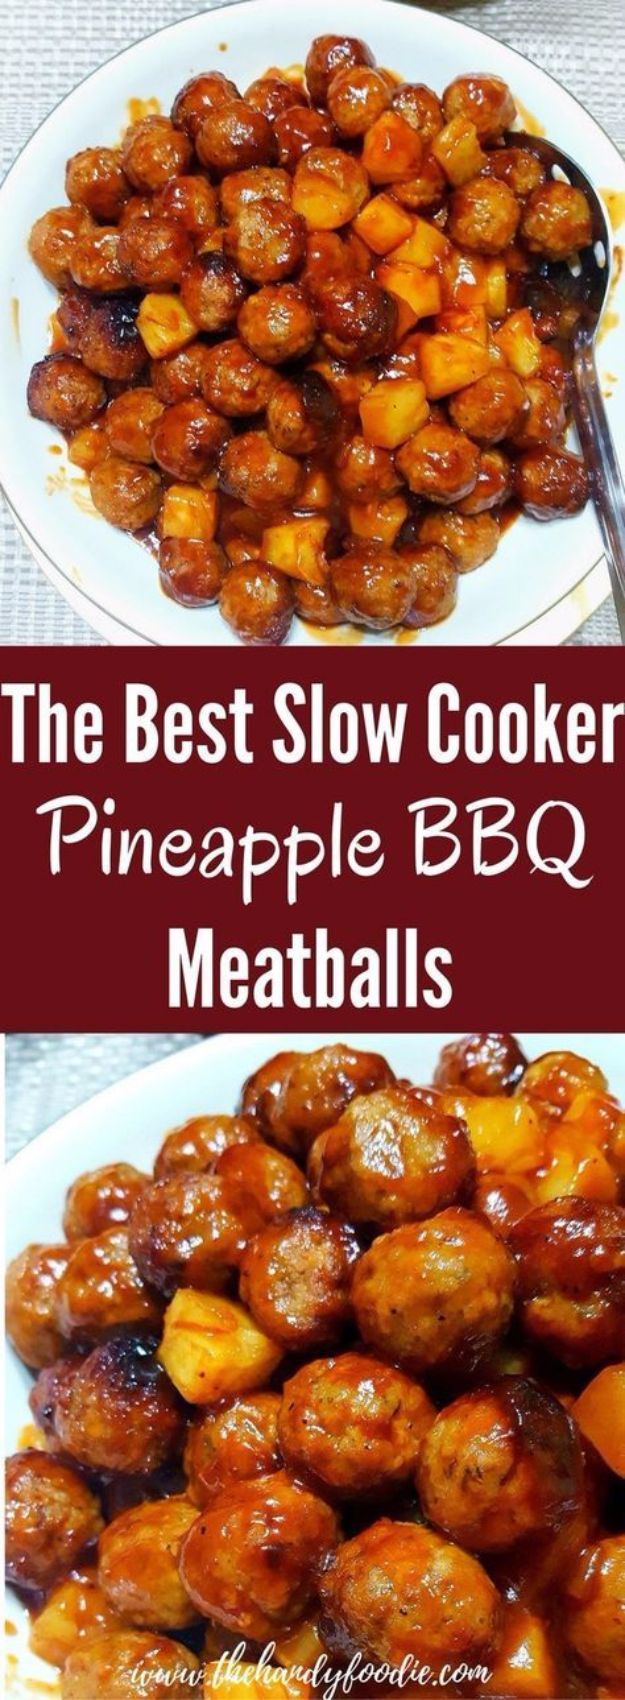 Best Barbecue Recipes - Slow Cooker Pineapple BBQ Meatballs - Easy BBQ Recipe Ideas for Lunch, Dinner and Quick Party Appetizers - Grilled and Smoked Foods, Chicken, Beef and Meat, Fish and Vegetable Ideas for Grilling - Sauces and Rubs, Seasonings and Favorite Bar BBQ Tips #bbq #bbqrecipes #grilling